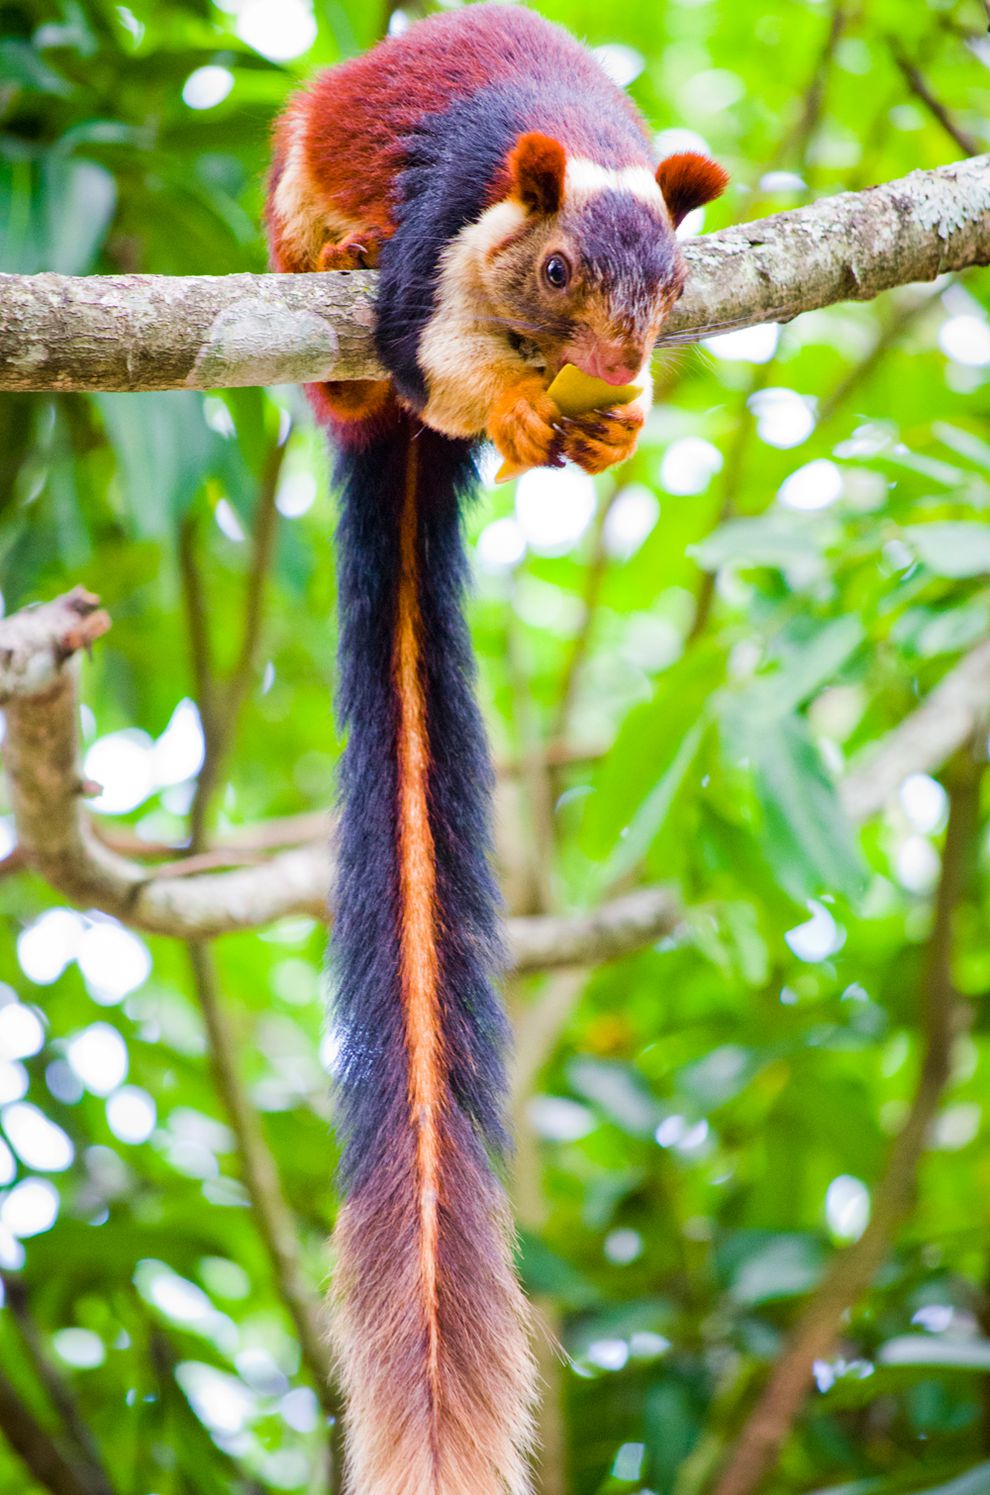 mnn.com earth-matters animals blogs indias-beautiful-giant-colorful-squirrels.jpg